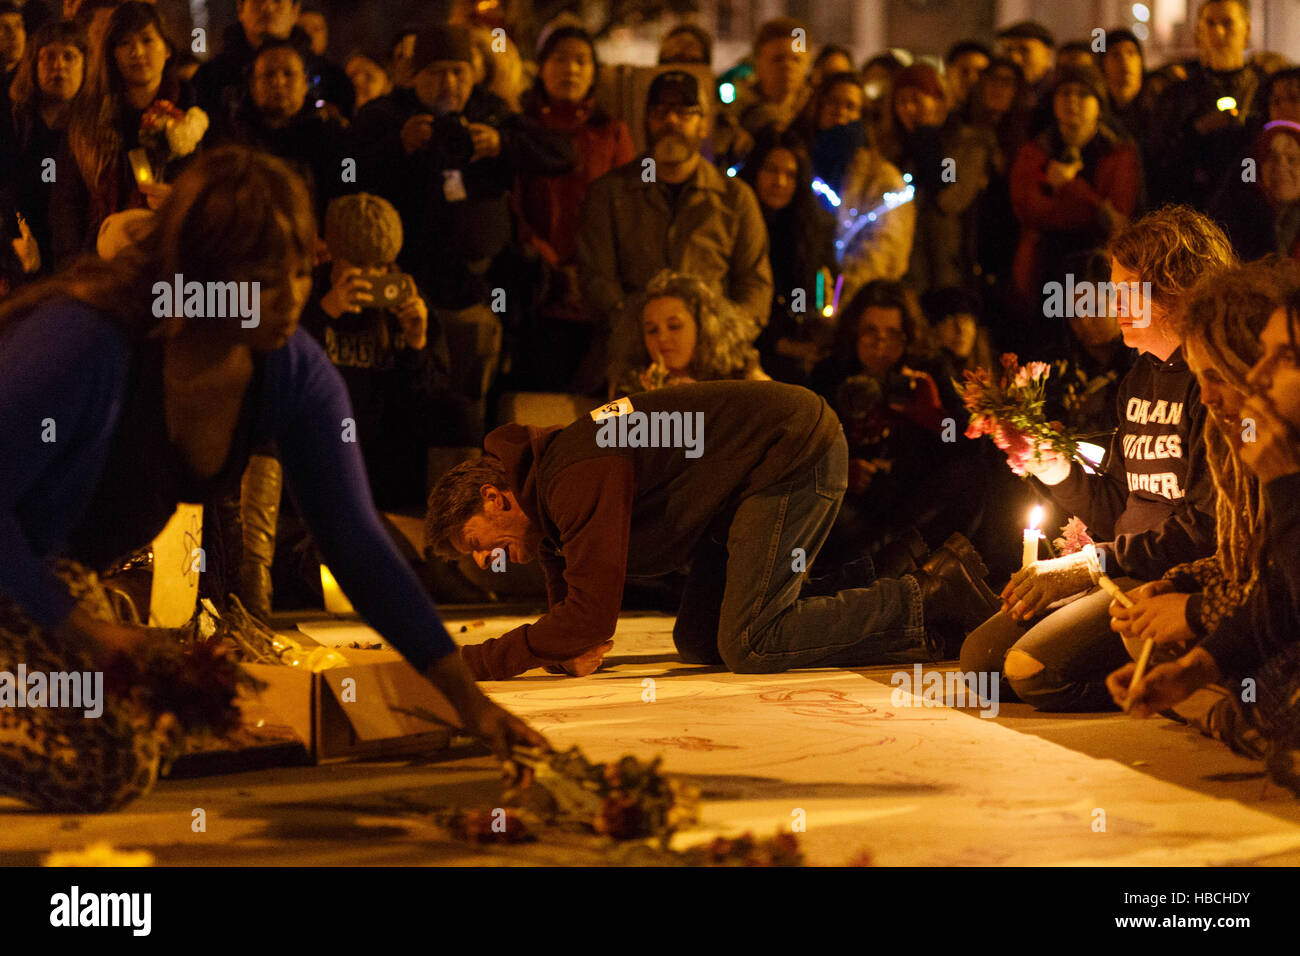 Oakland, USA. 05th Dec, 2016. A man is overcome by emotion as he writes out a message during a candle light vigil for victims of the Ghost Ship fire in Oakland, CA. Credit:  John Orvis/Alamy Live News Stock Photo